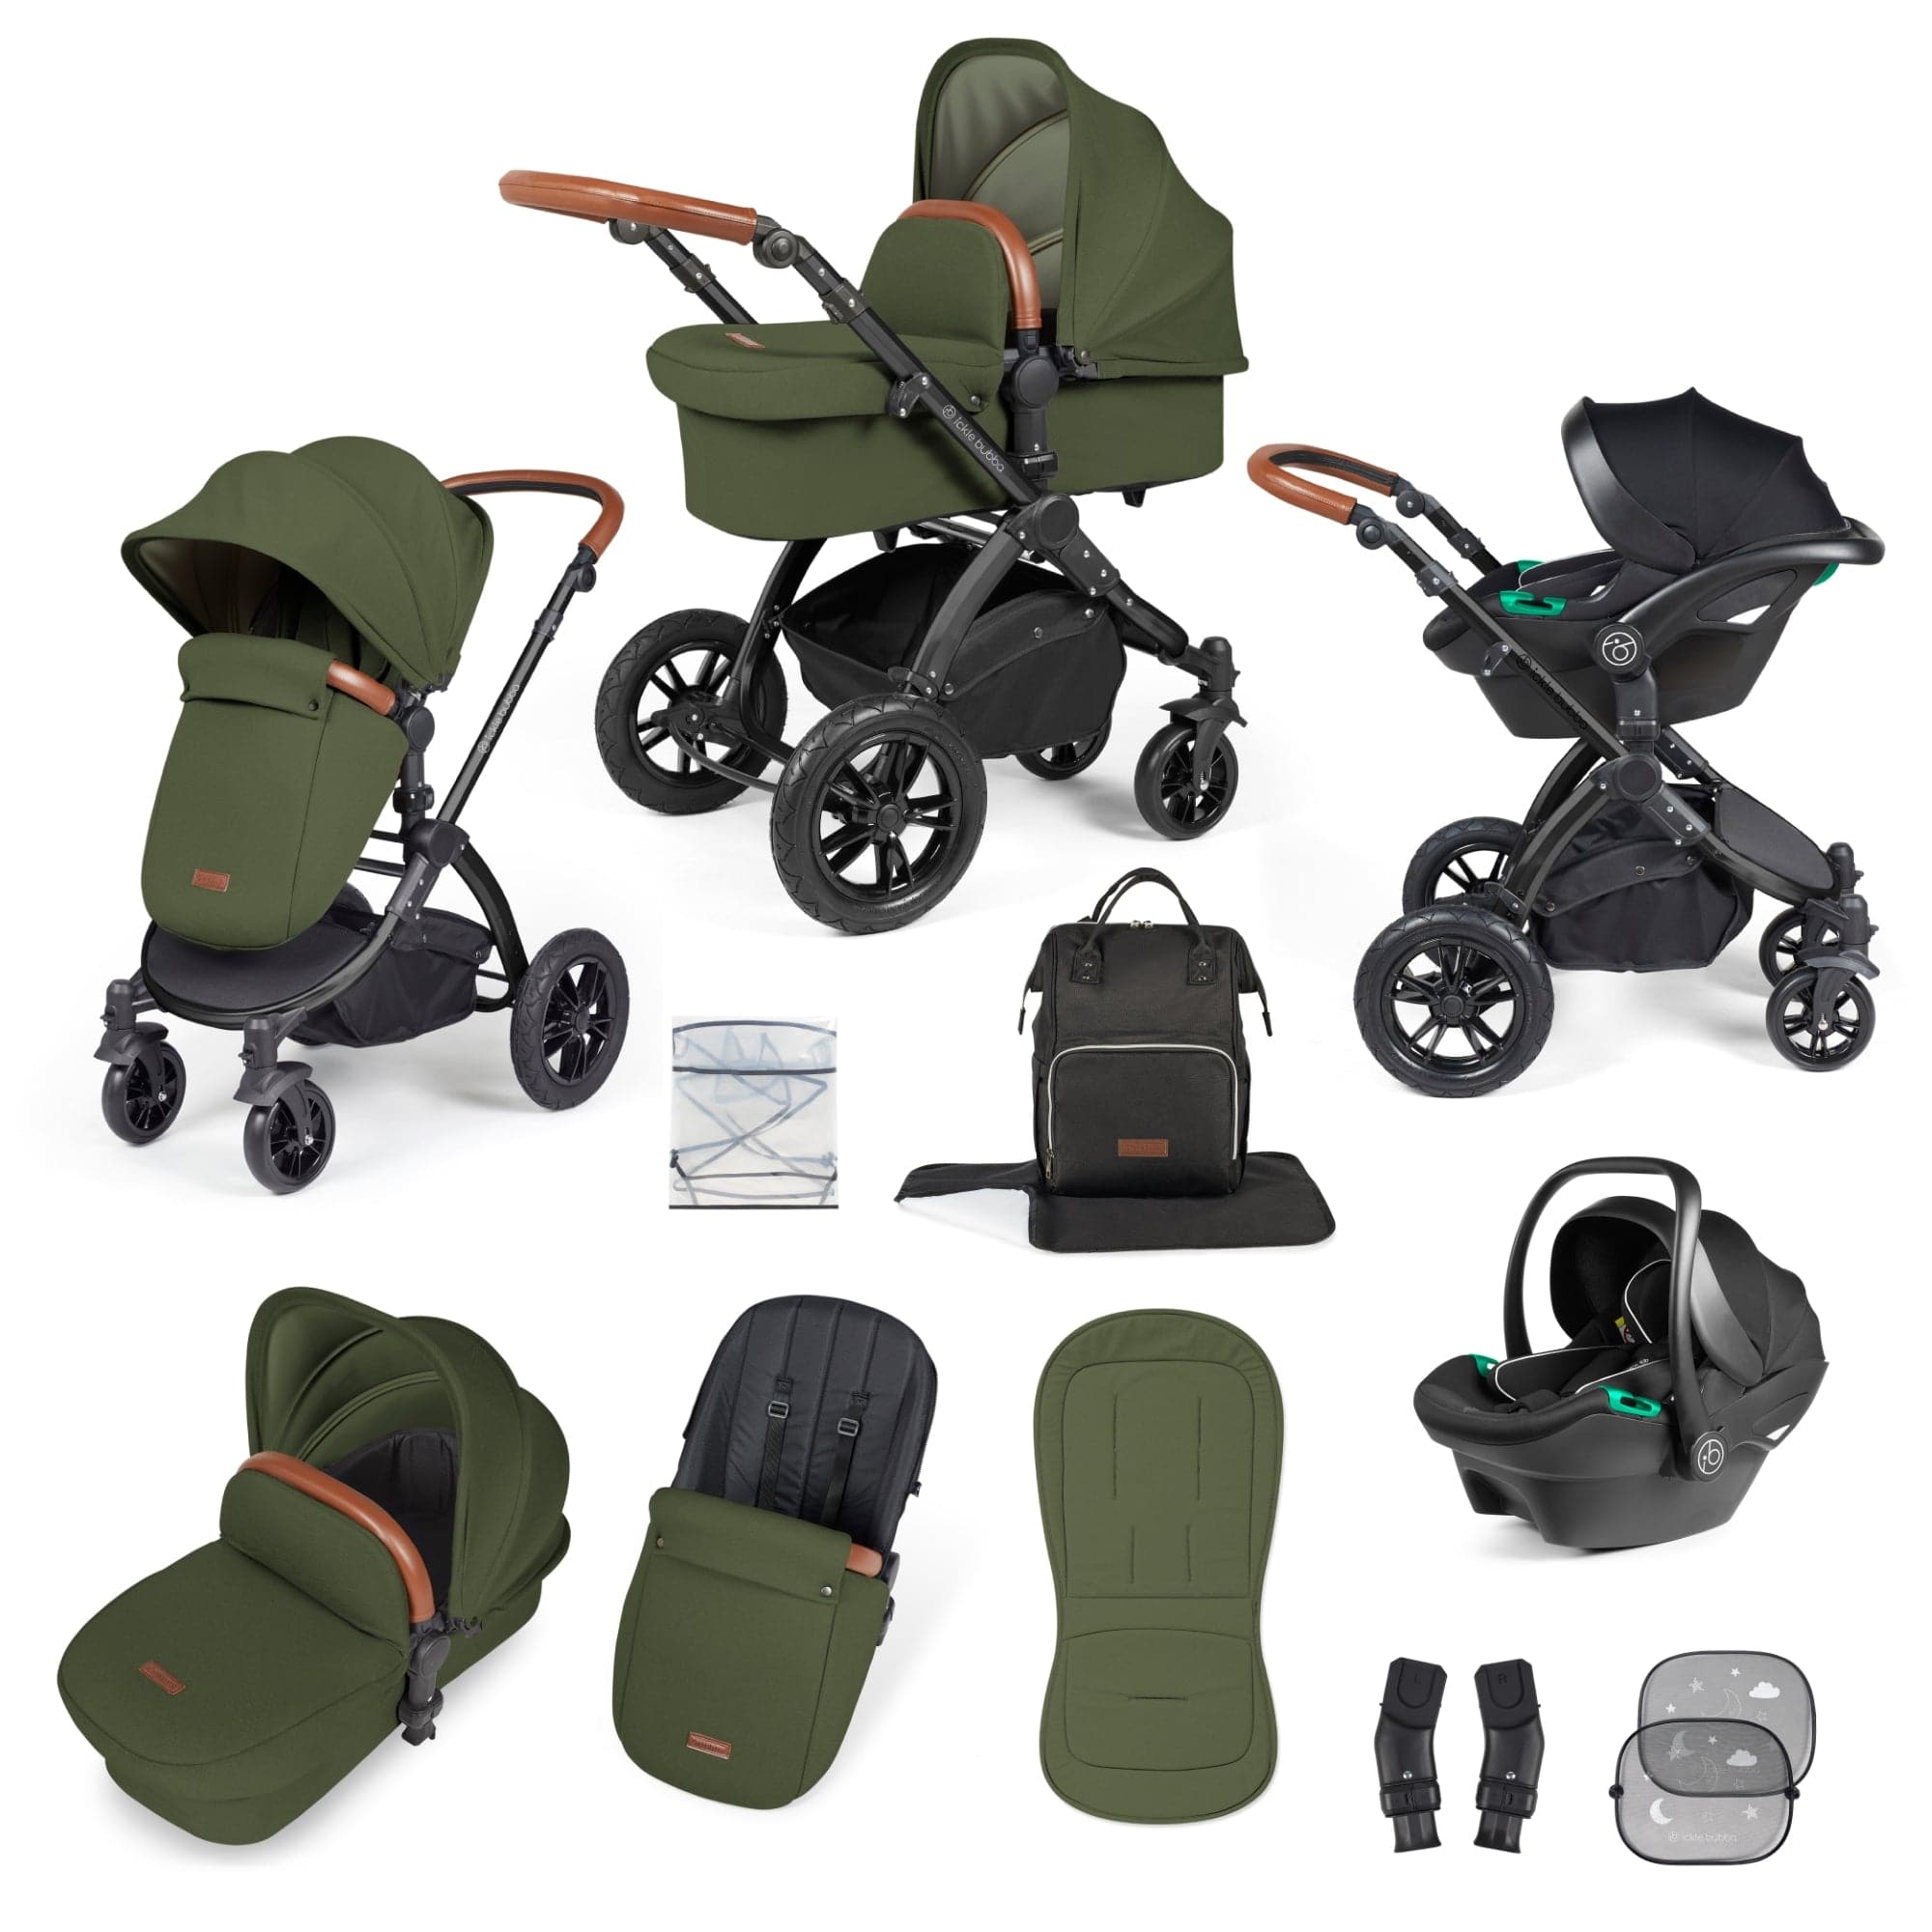 Ickle Bubba Stomp Luxe All-In-One I-Size Travel System - Black / Woodland / Tan - For Your Little One